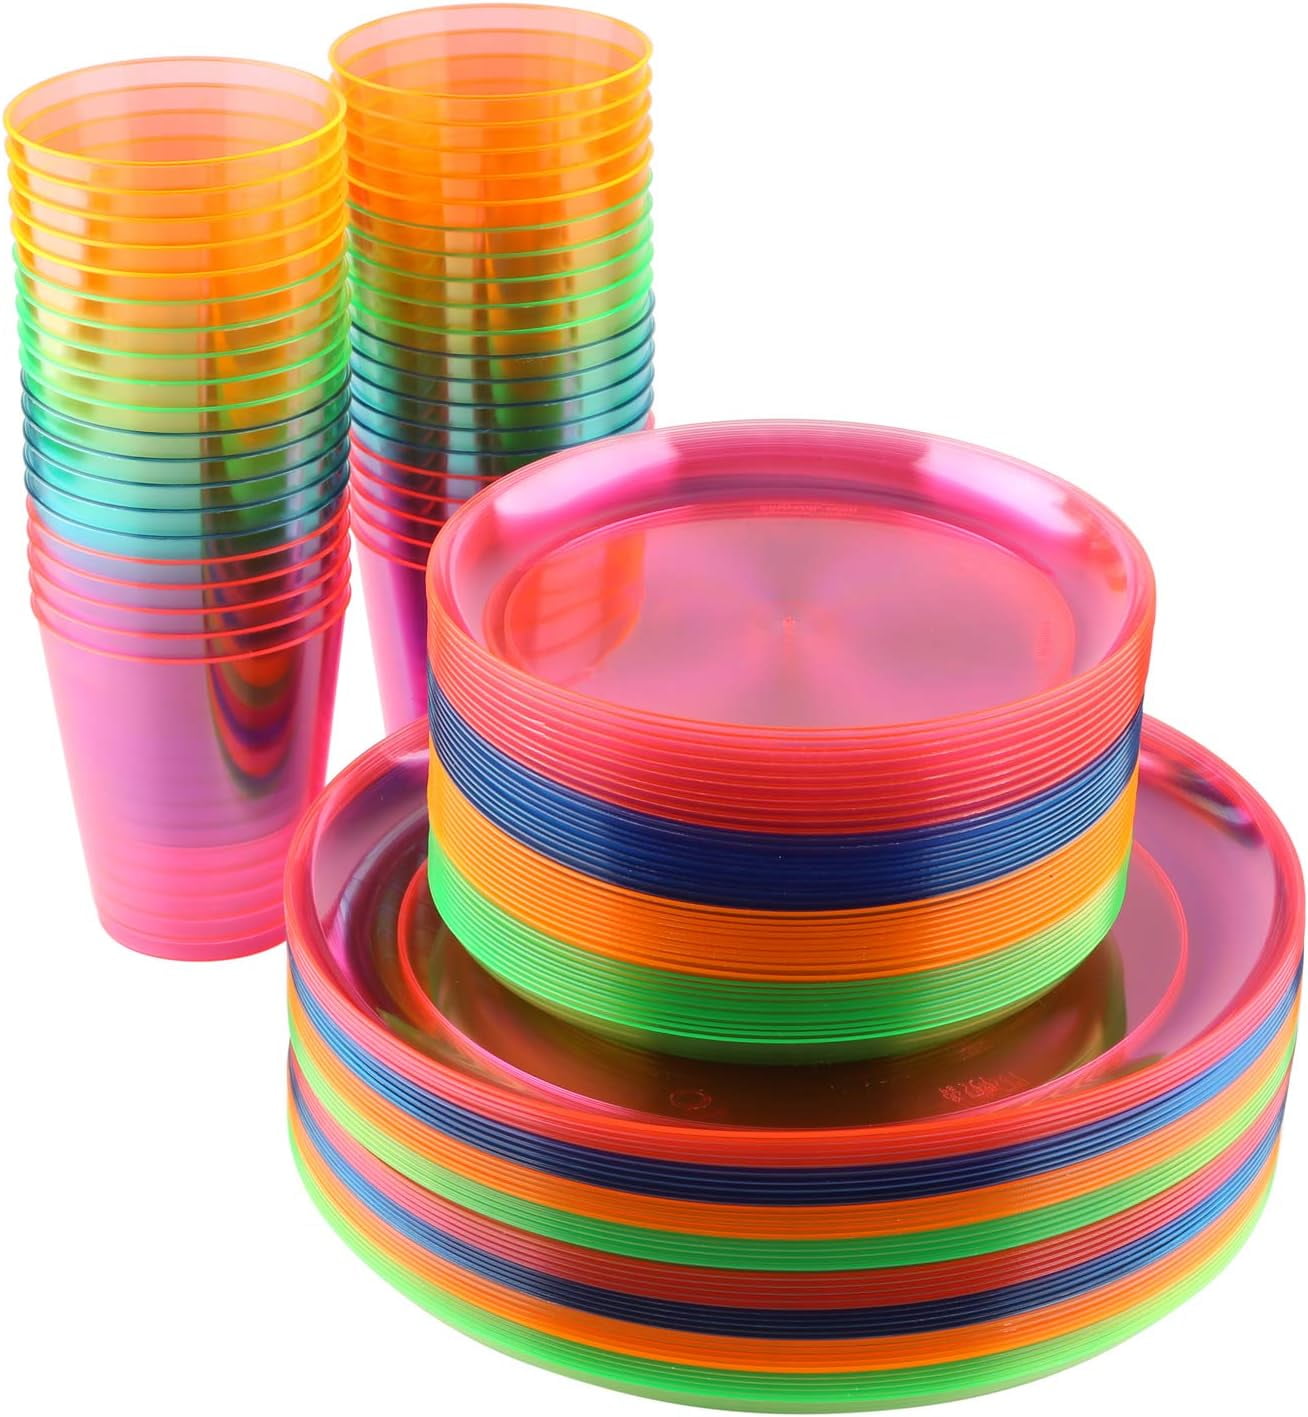 Xinnun 40 Set Neon Glow Party Supplies Neon Plates Cup Napkin Plastic  Disposable Tablewares for Glow Party Favor, 9'' Hard Plastic Plates 16 oz  Cups